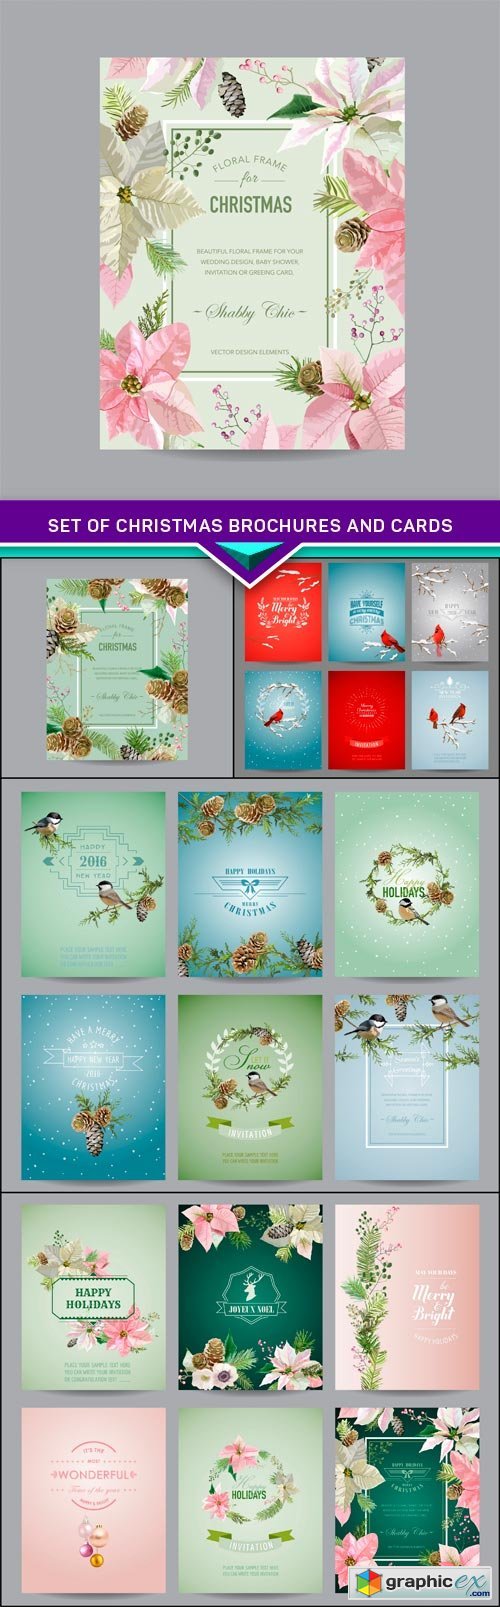 Set of Christmas Brochures and Cards 5X EPS